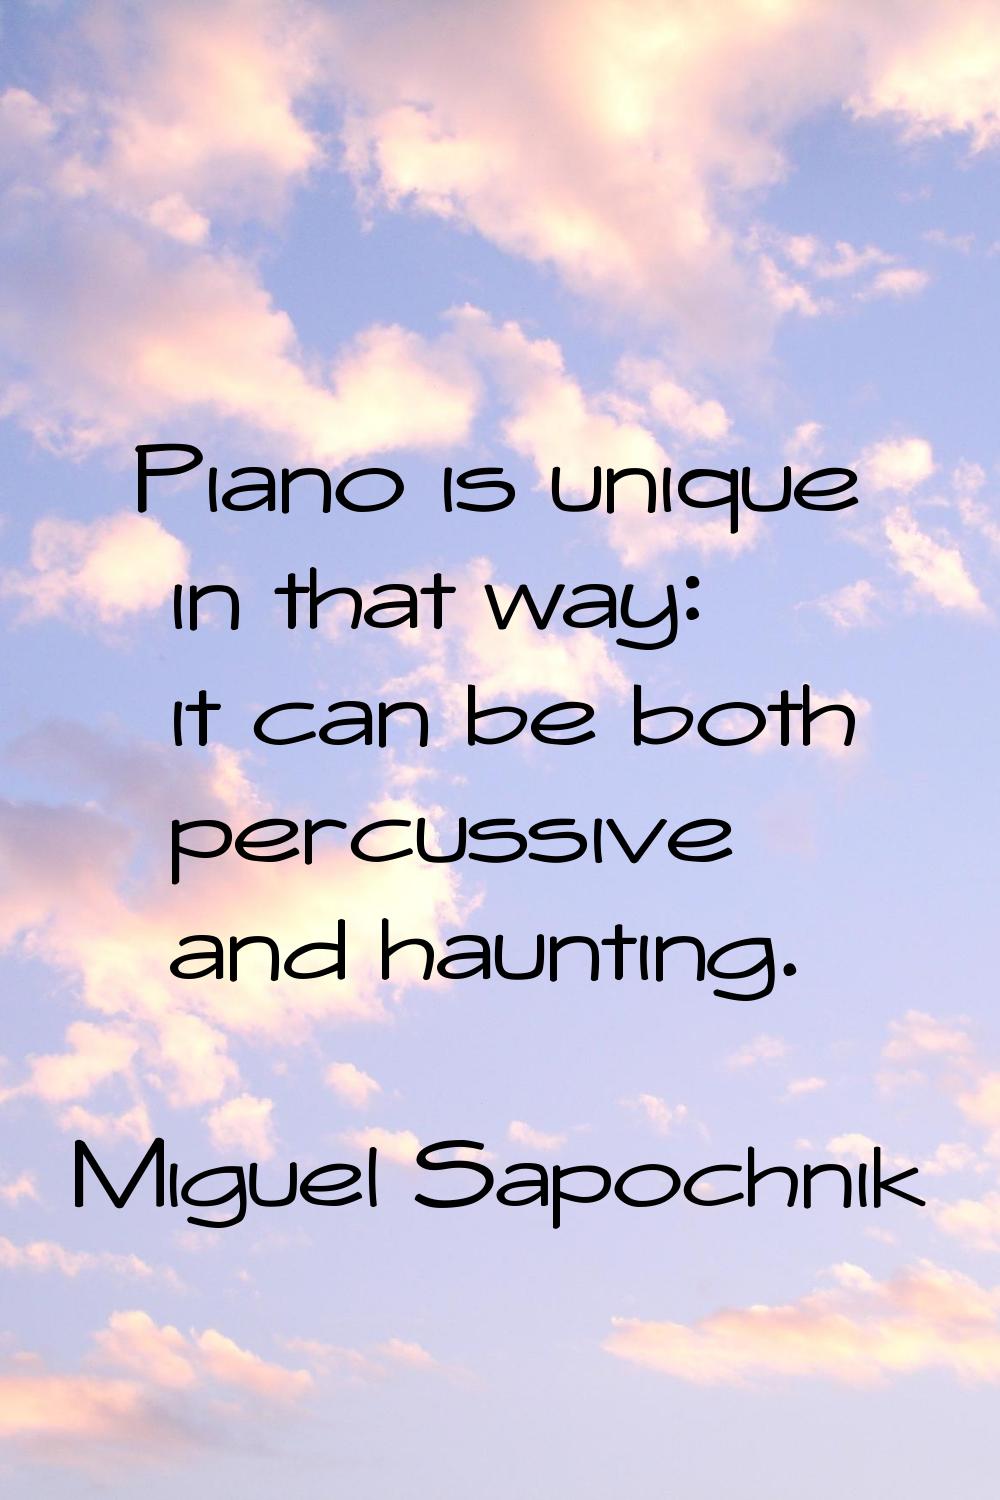 Piano is unique in that way: it can be both percussive and haunting.